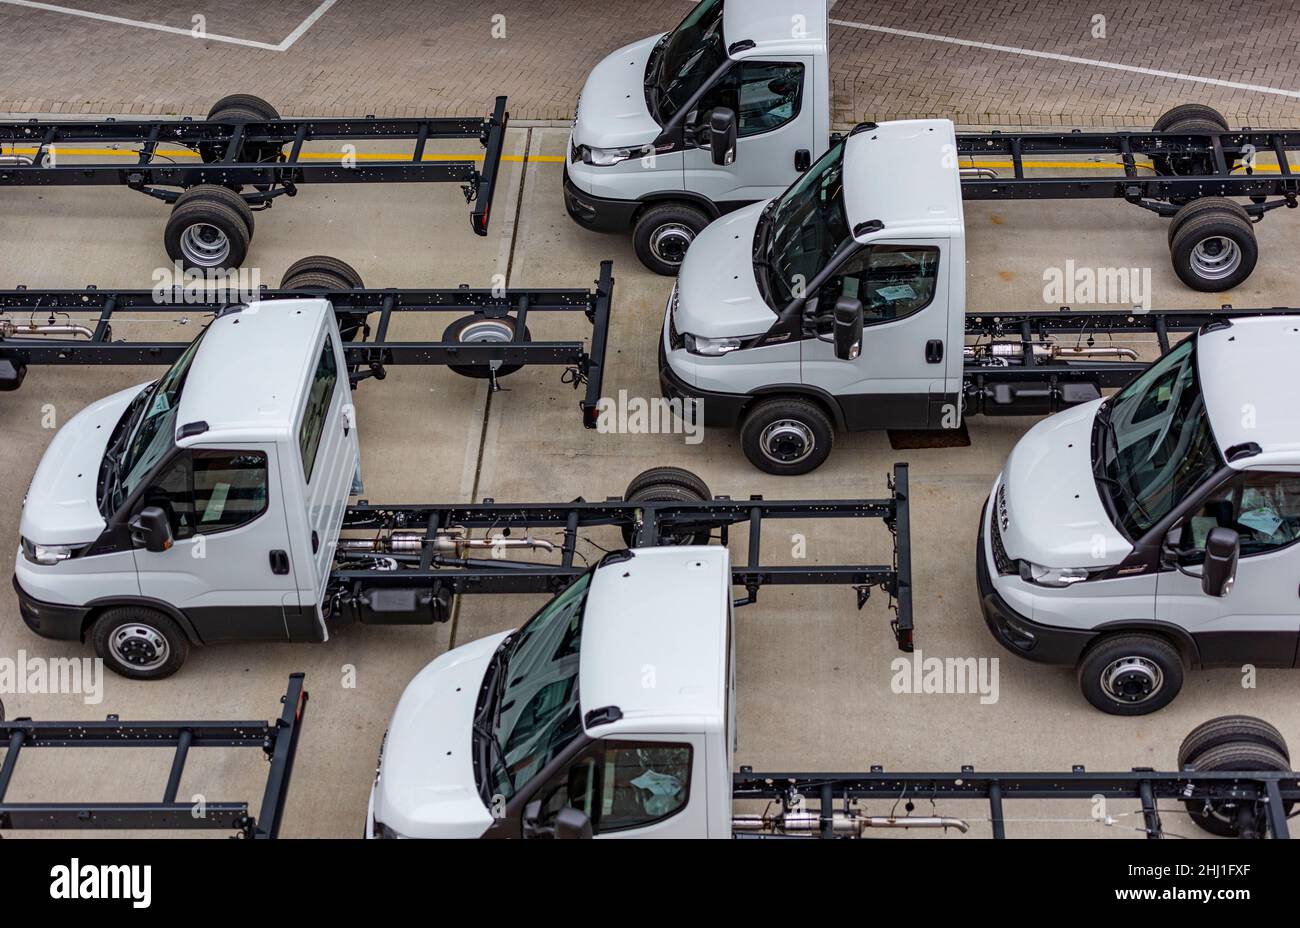 vans cabs and chasis awaiting export in a car park at the port of southampton docks uk, vehicles on dockside waiting shipping abroad by carriers. Stock Photo